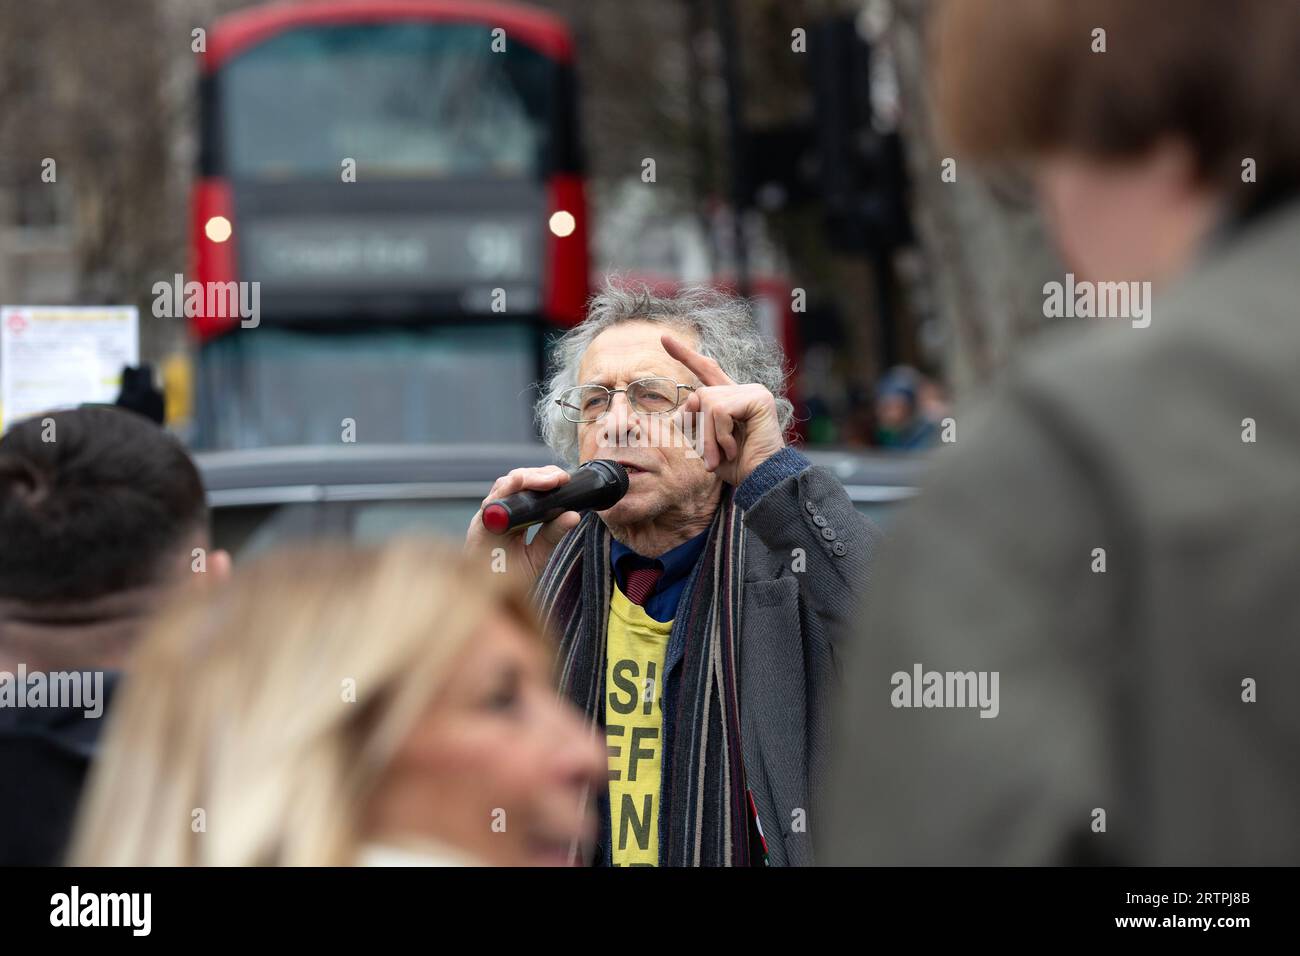 Piers Corbyn, brother of former Labour Party leader Jeremy Corbyn, addresses the crowd during a protest against the expansion of ULEZ in London. Stock Photo